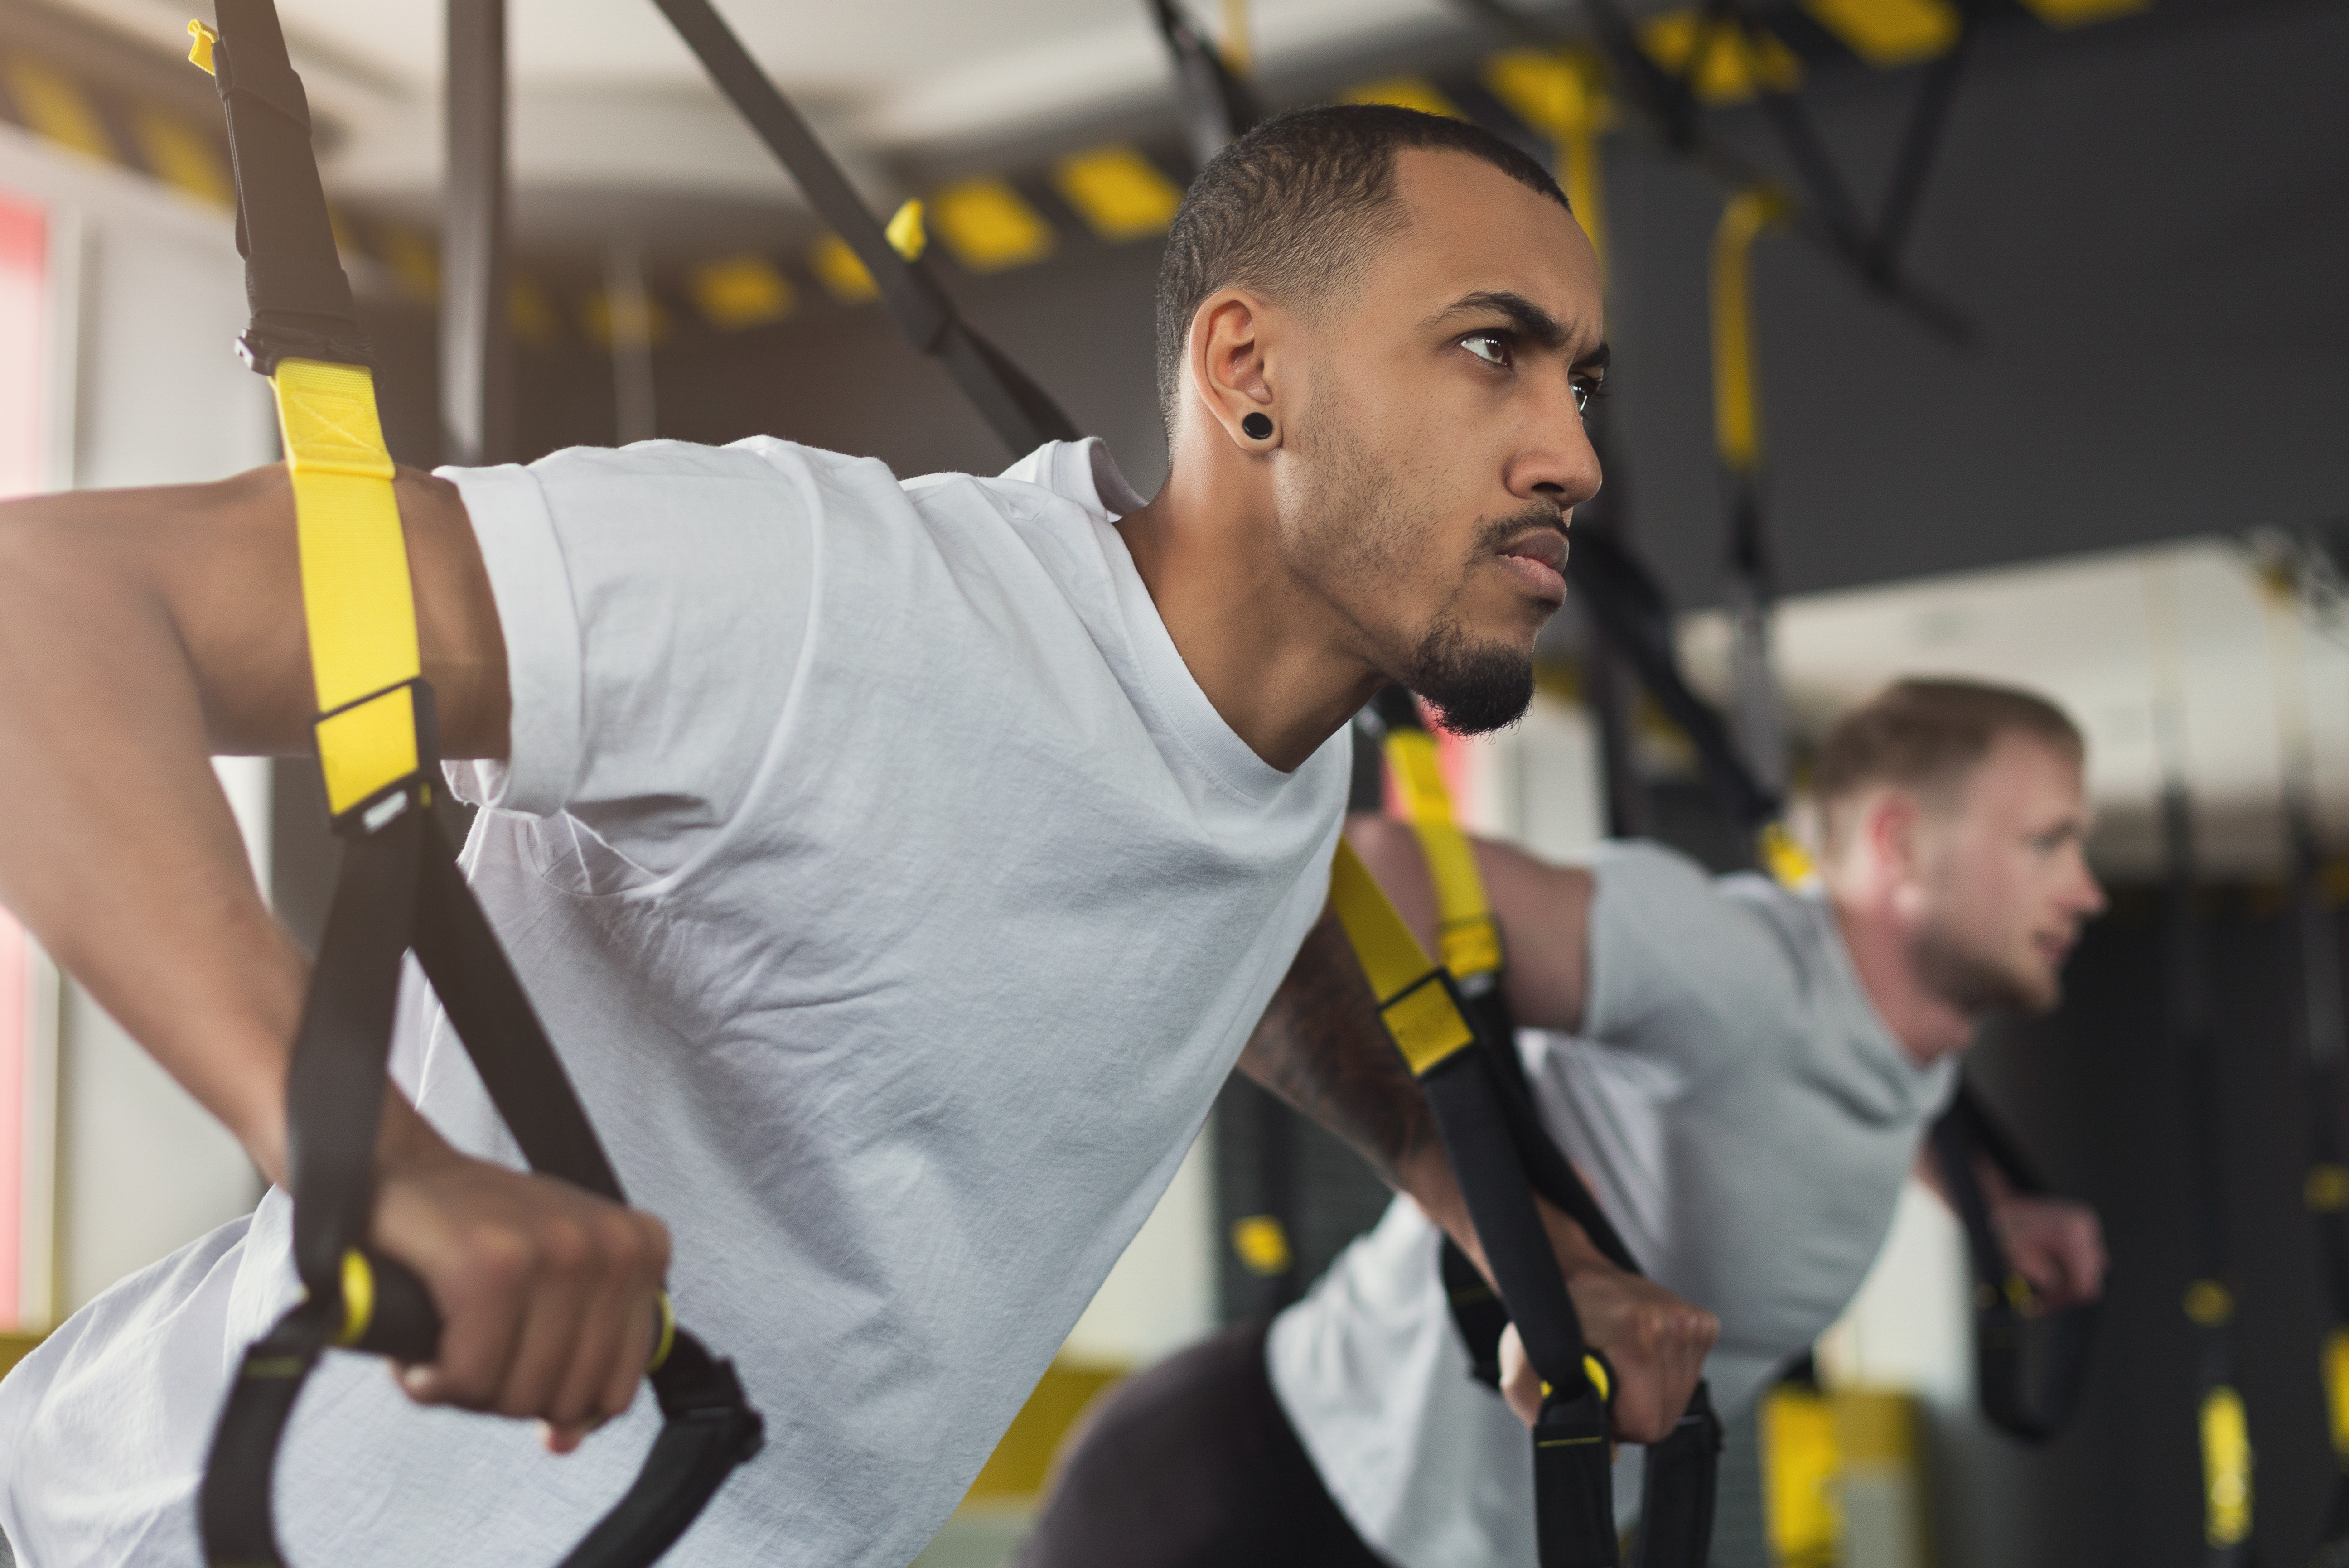 The Best TRX Exercises for the Upper Body